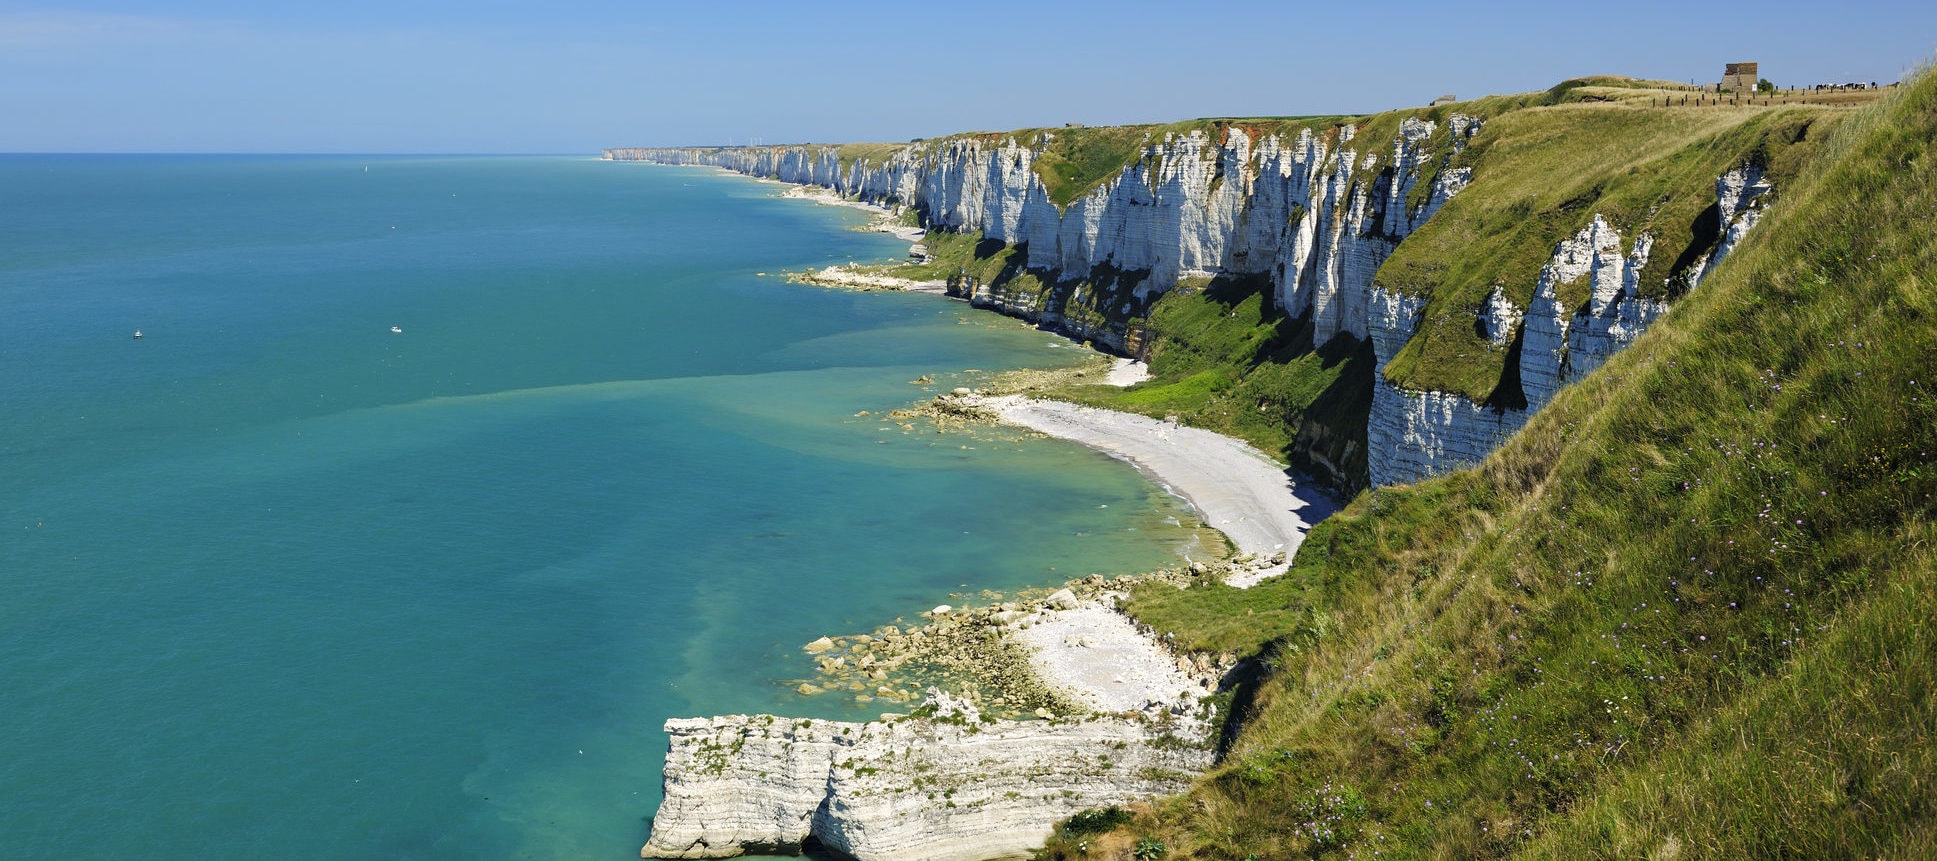 private tours of normandy from paris